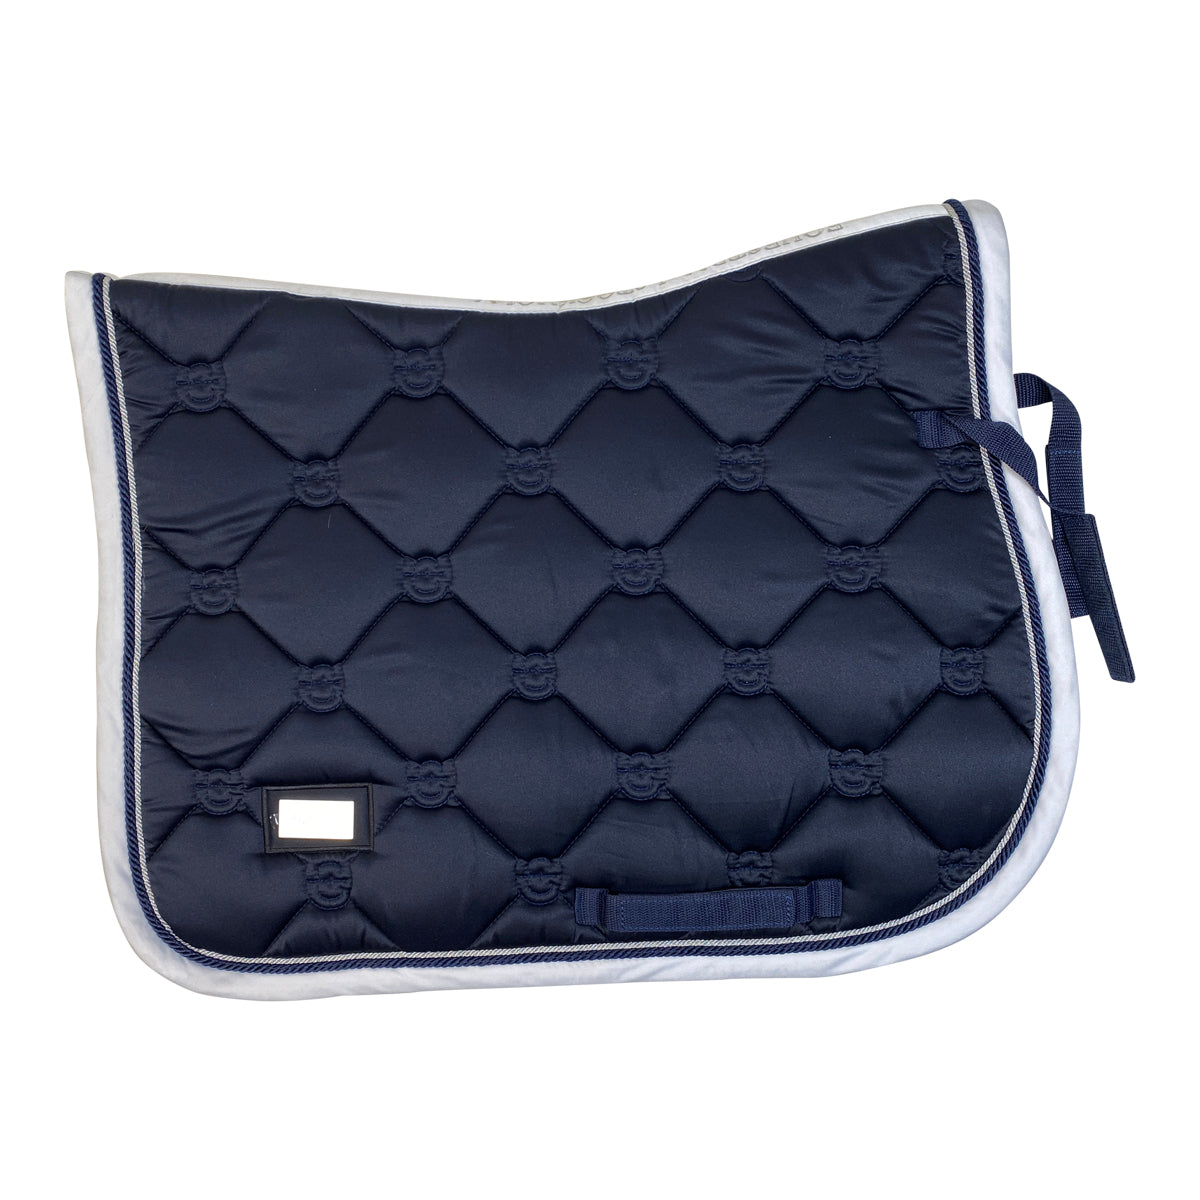 Equestrian Stockholm Jump Saddle Pad in Navy/White